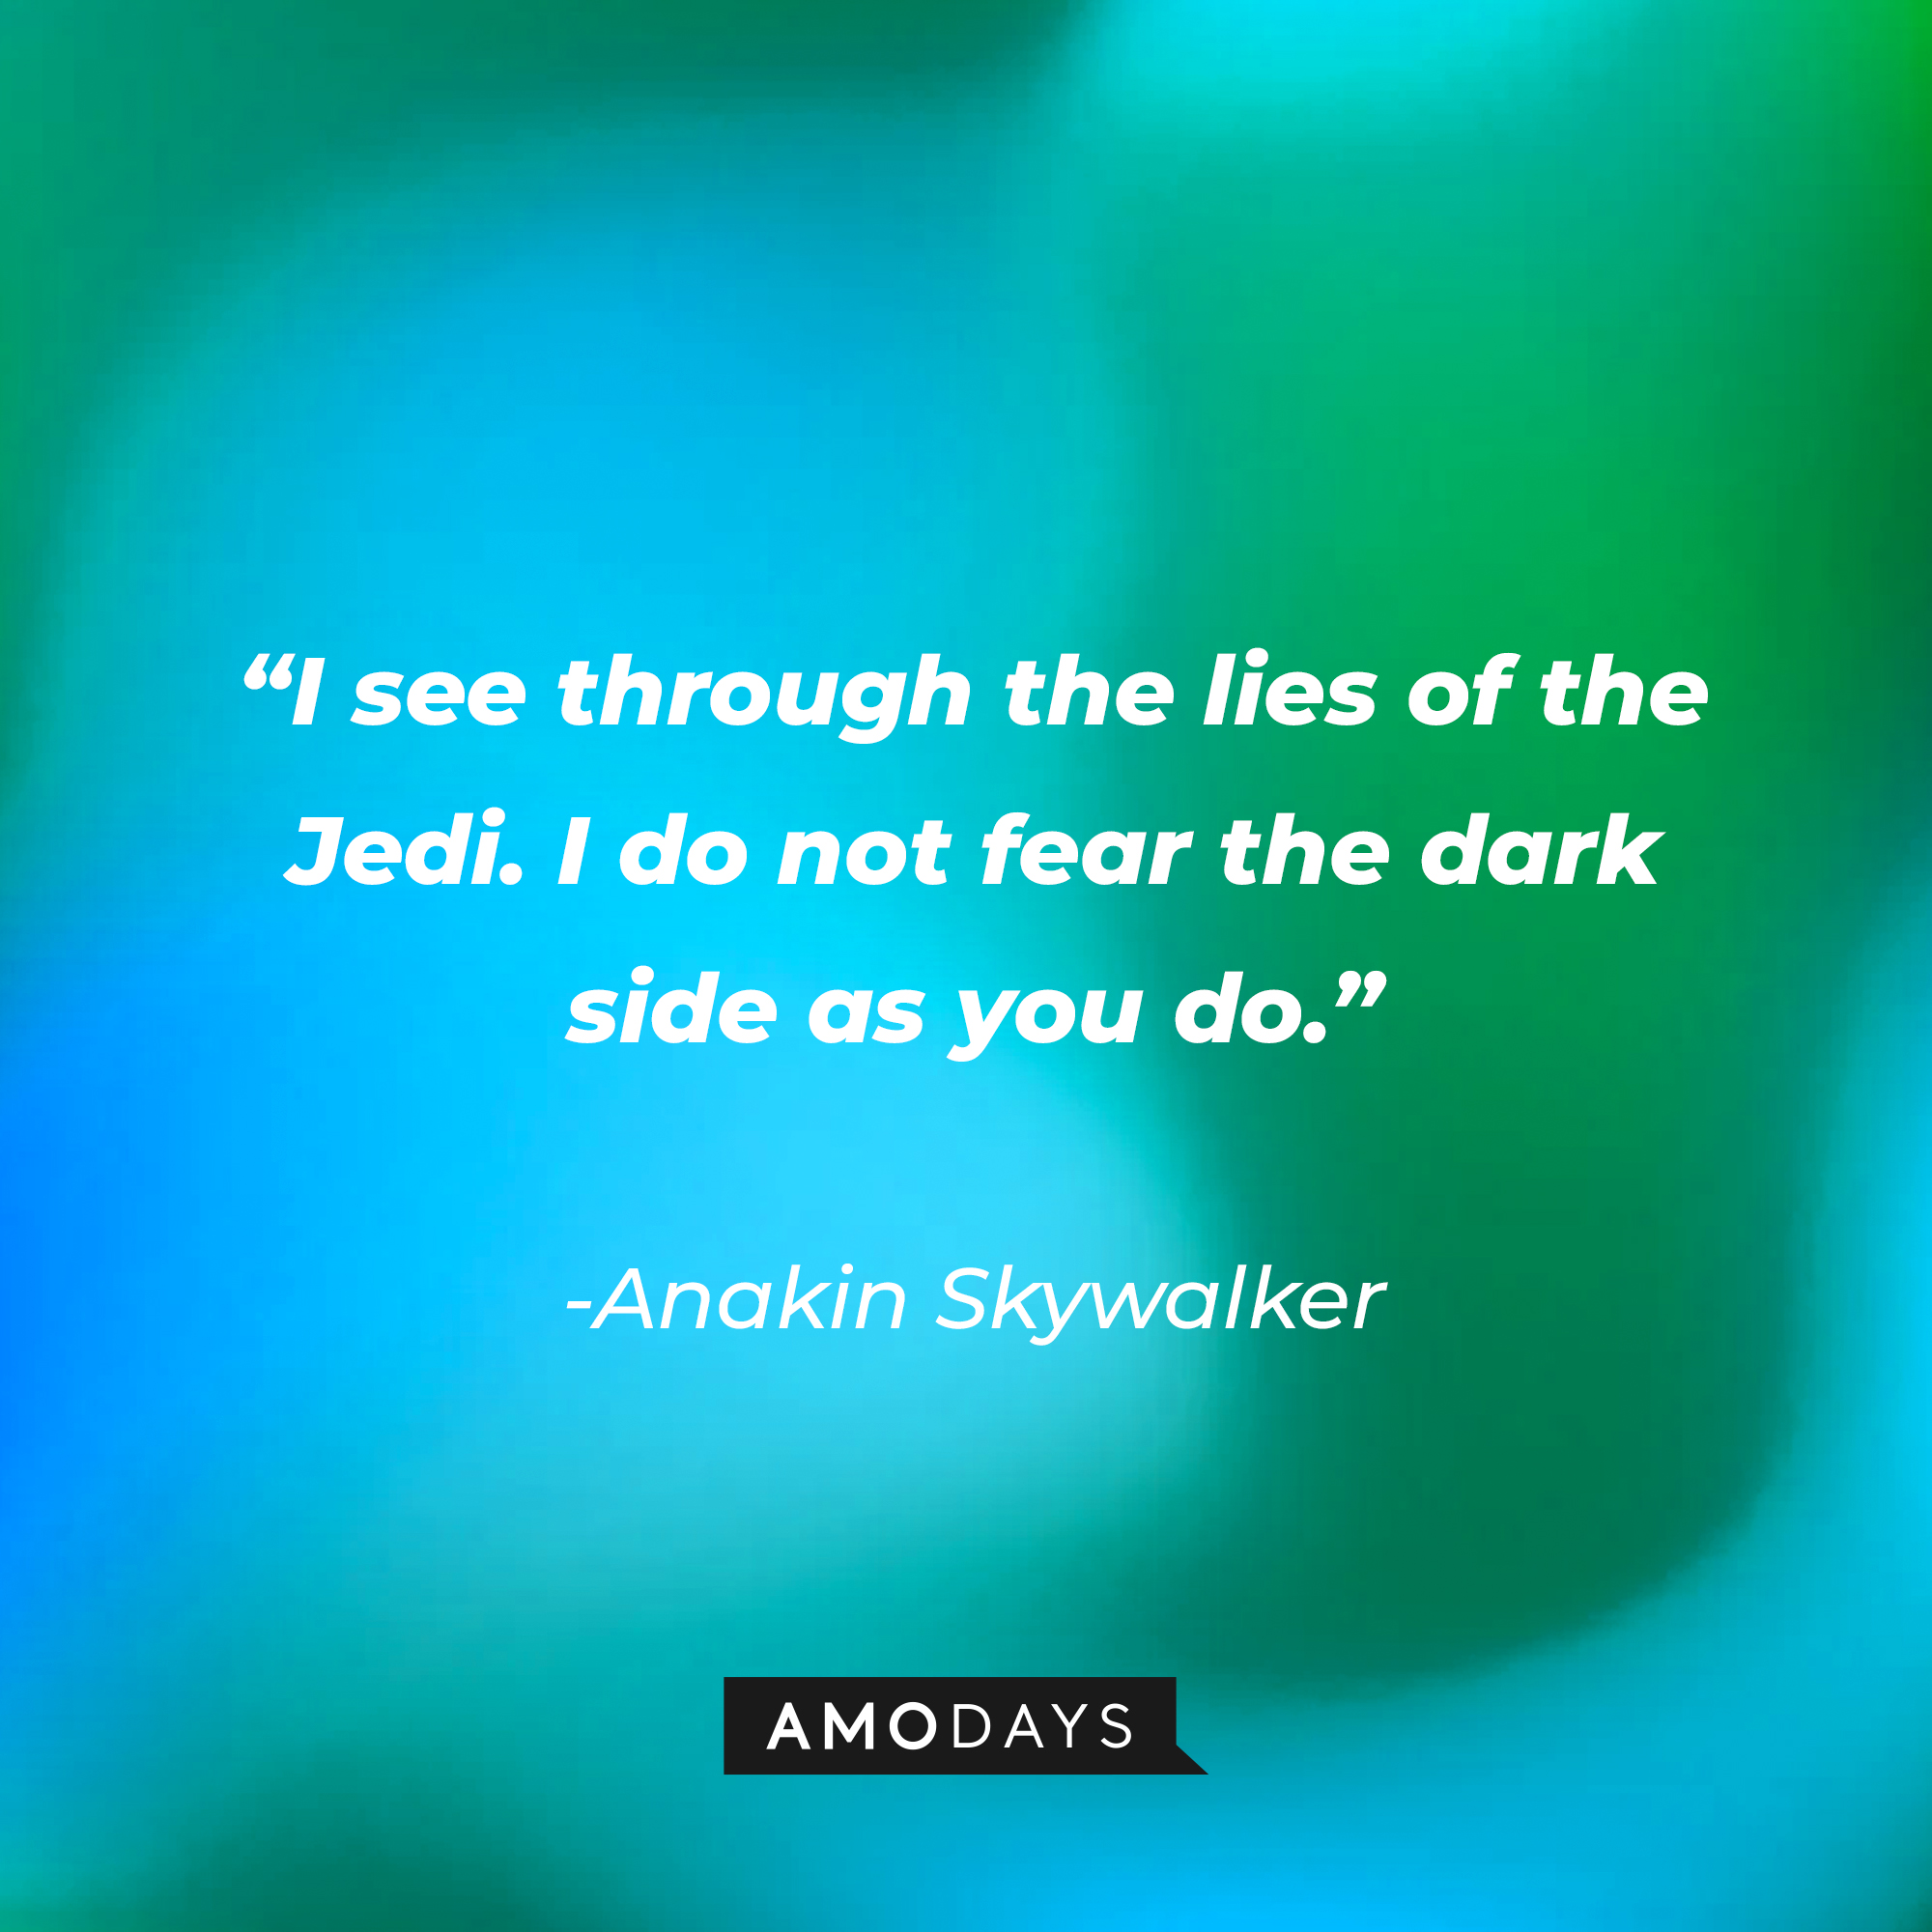 Anakin Skywalker’s quote: “I see through the lies of the Jedi. I do not fear the dark side as you do.” | Source: AmoDays